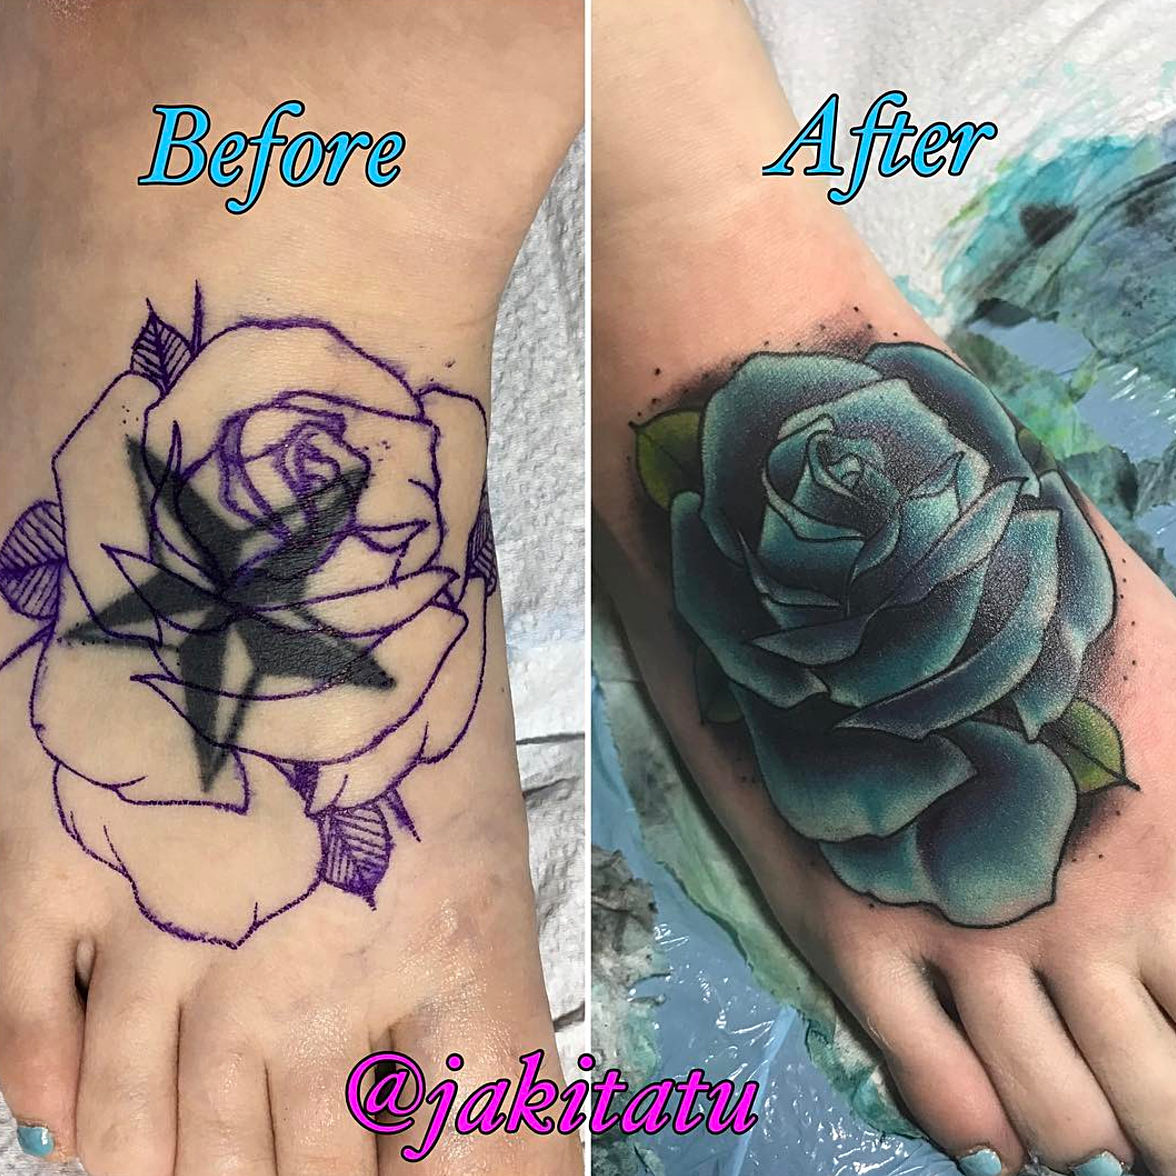 Coverup roses   Tattoos by TioLu 